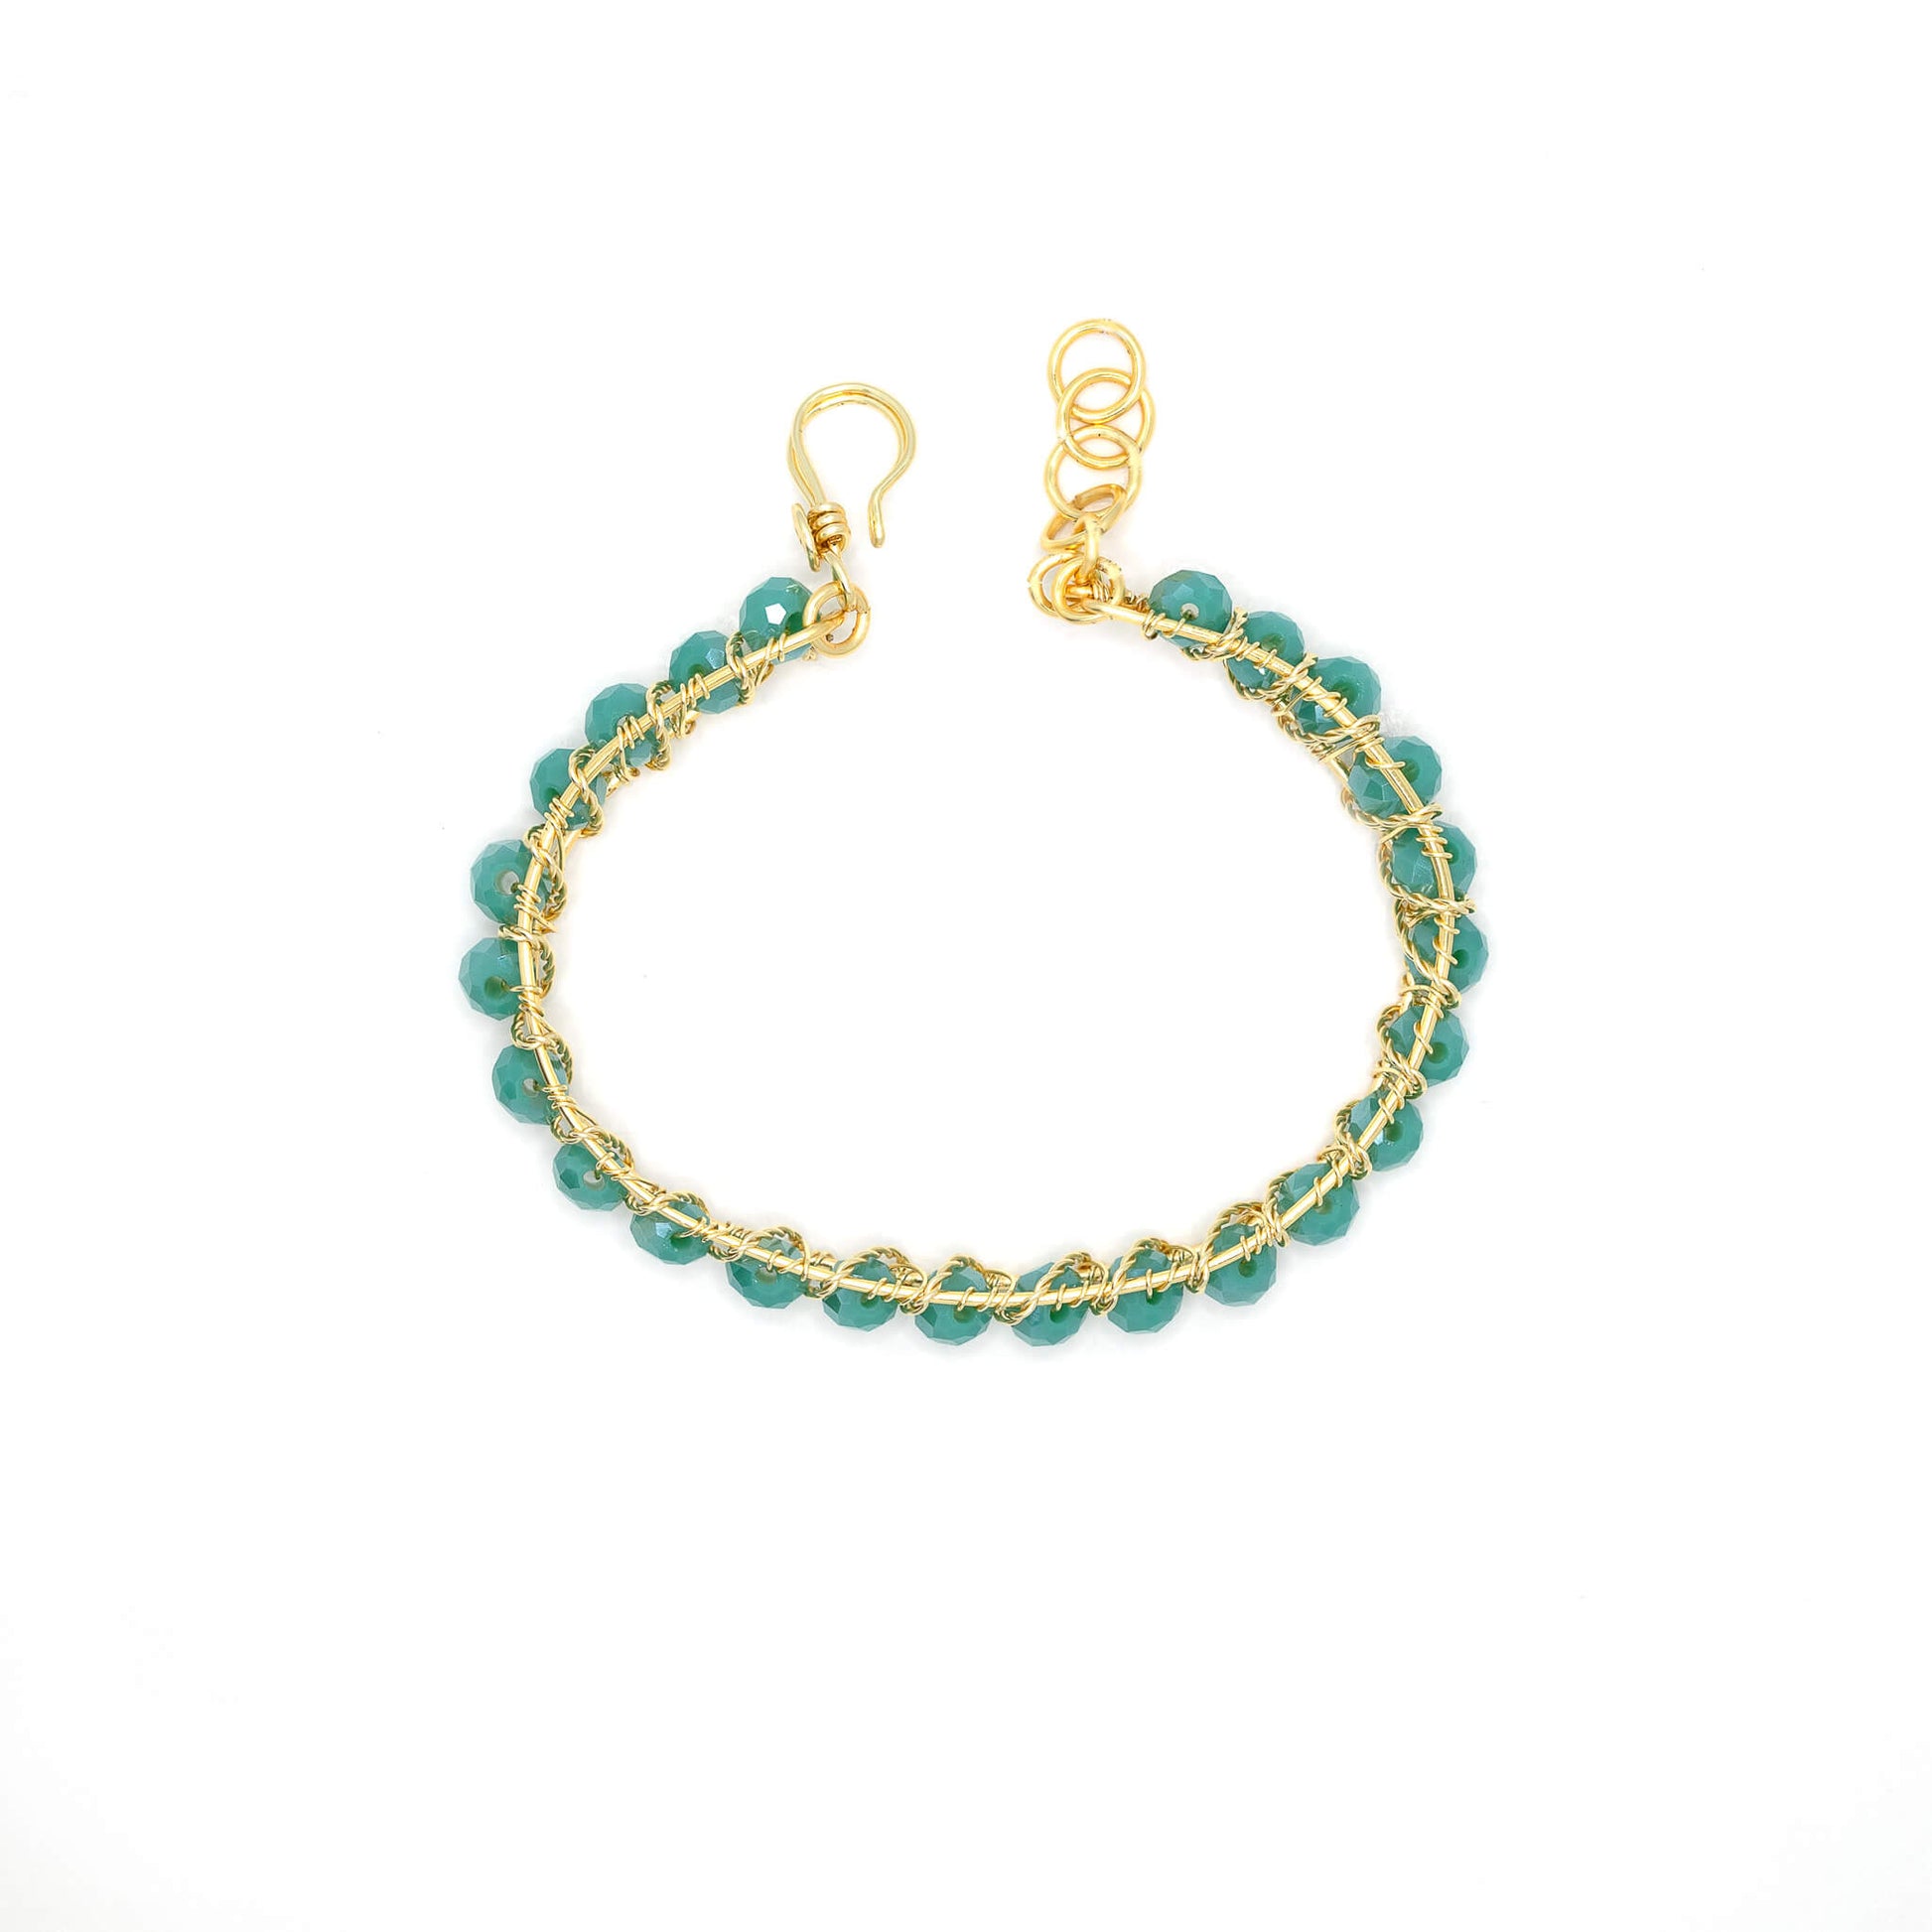 Bogen Bracelet is one size fits all. Gold and Green bracelet. Handmade with Non-tarnish Gold plated wire and beads crystals. Wire-wrapped beaded bracelet. (Flat)